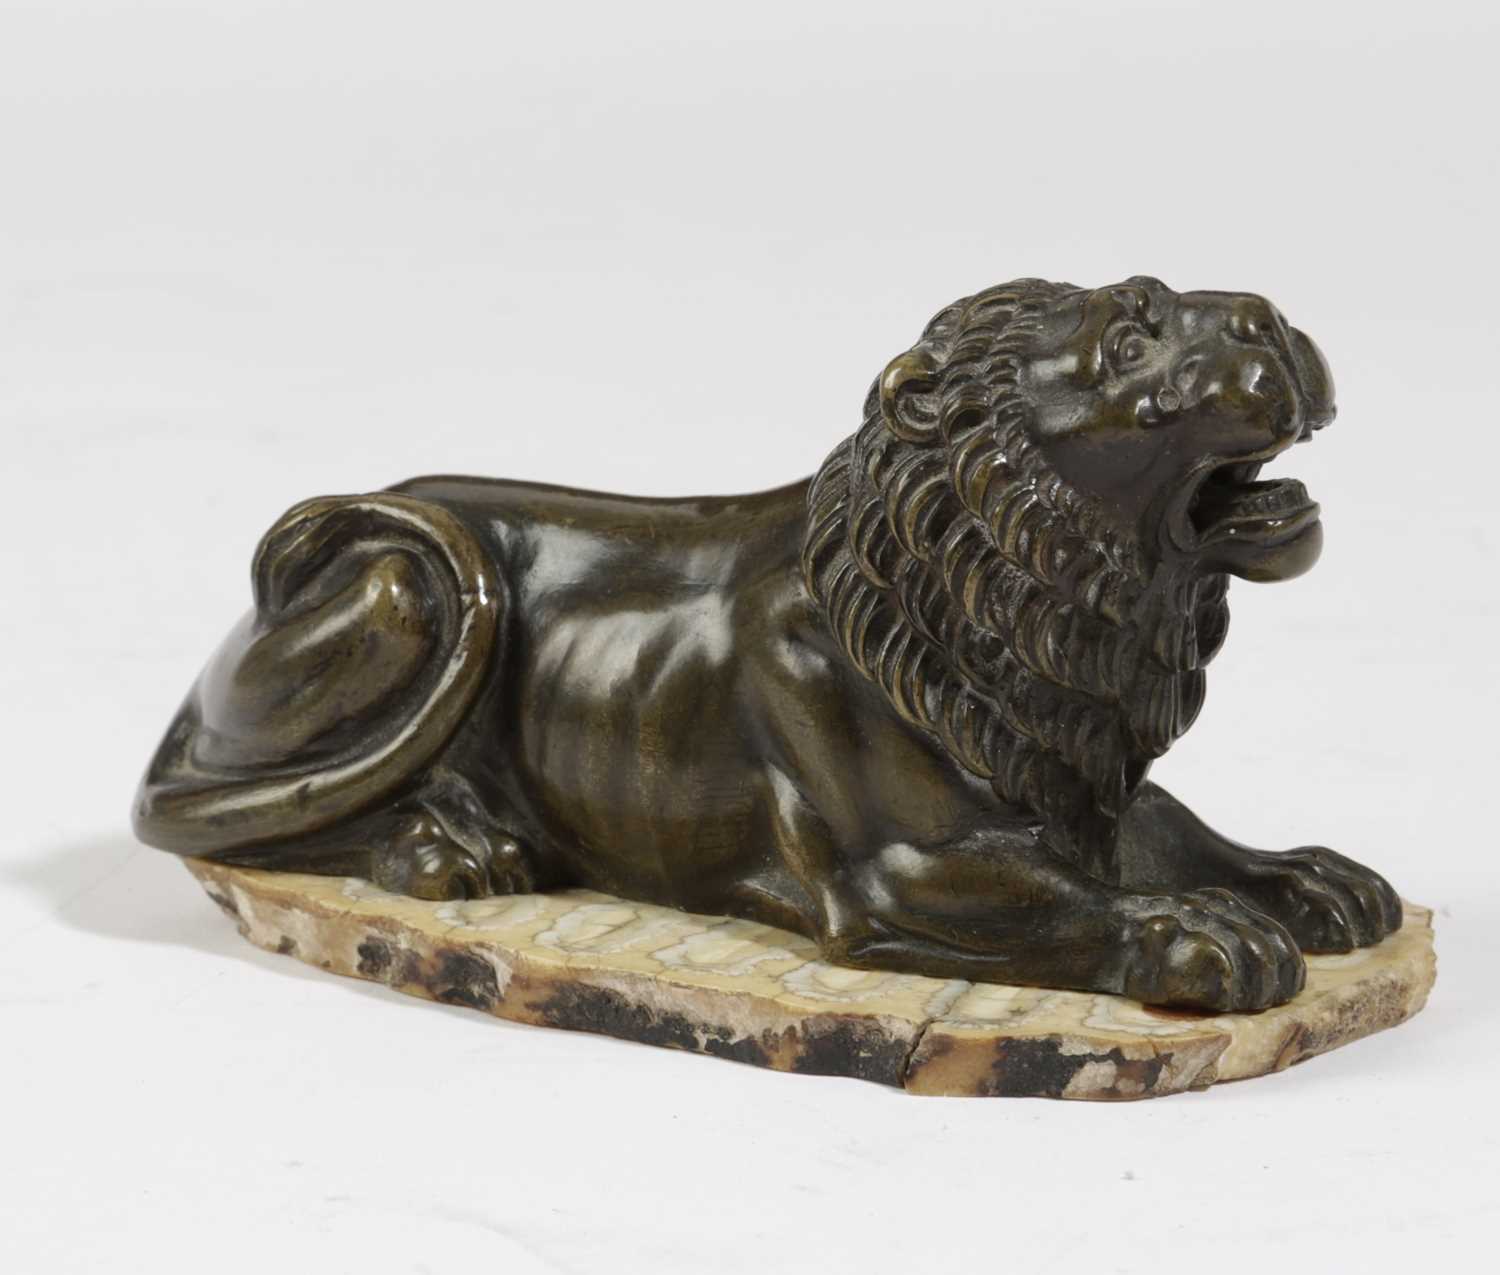 A FRENCH BRONZE MODEL OF A RECUMBENT LION EARLY 19TH CENTURY later mounted on a slice of mammoth - Image 2 of 2